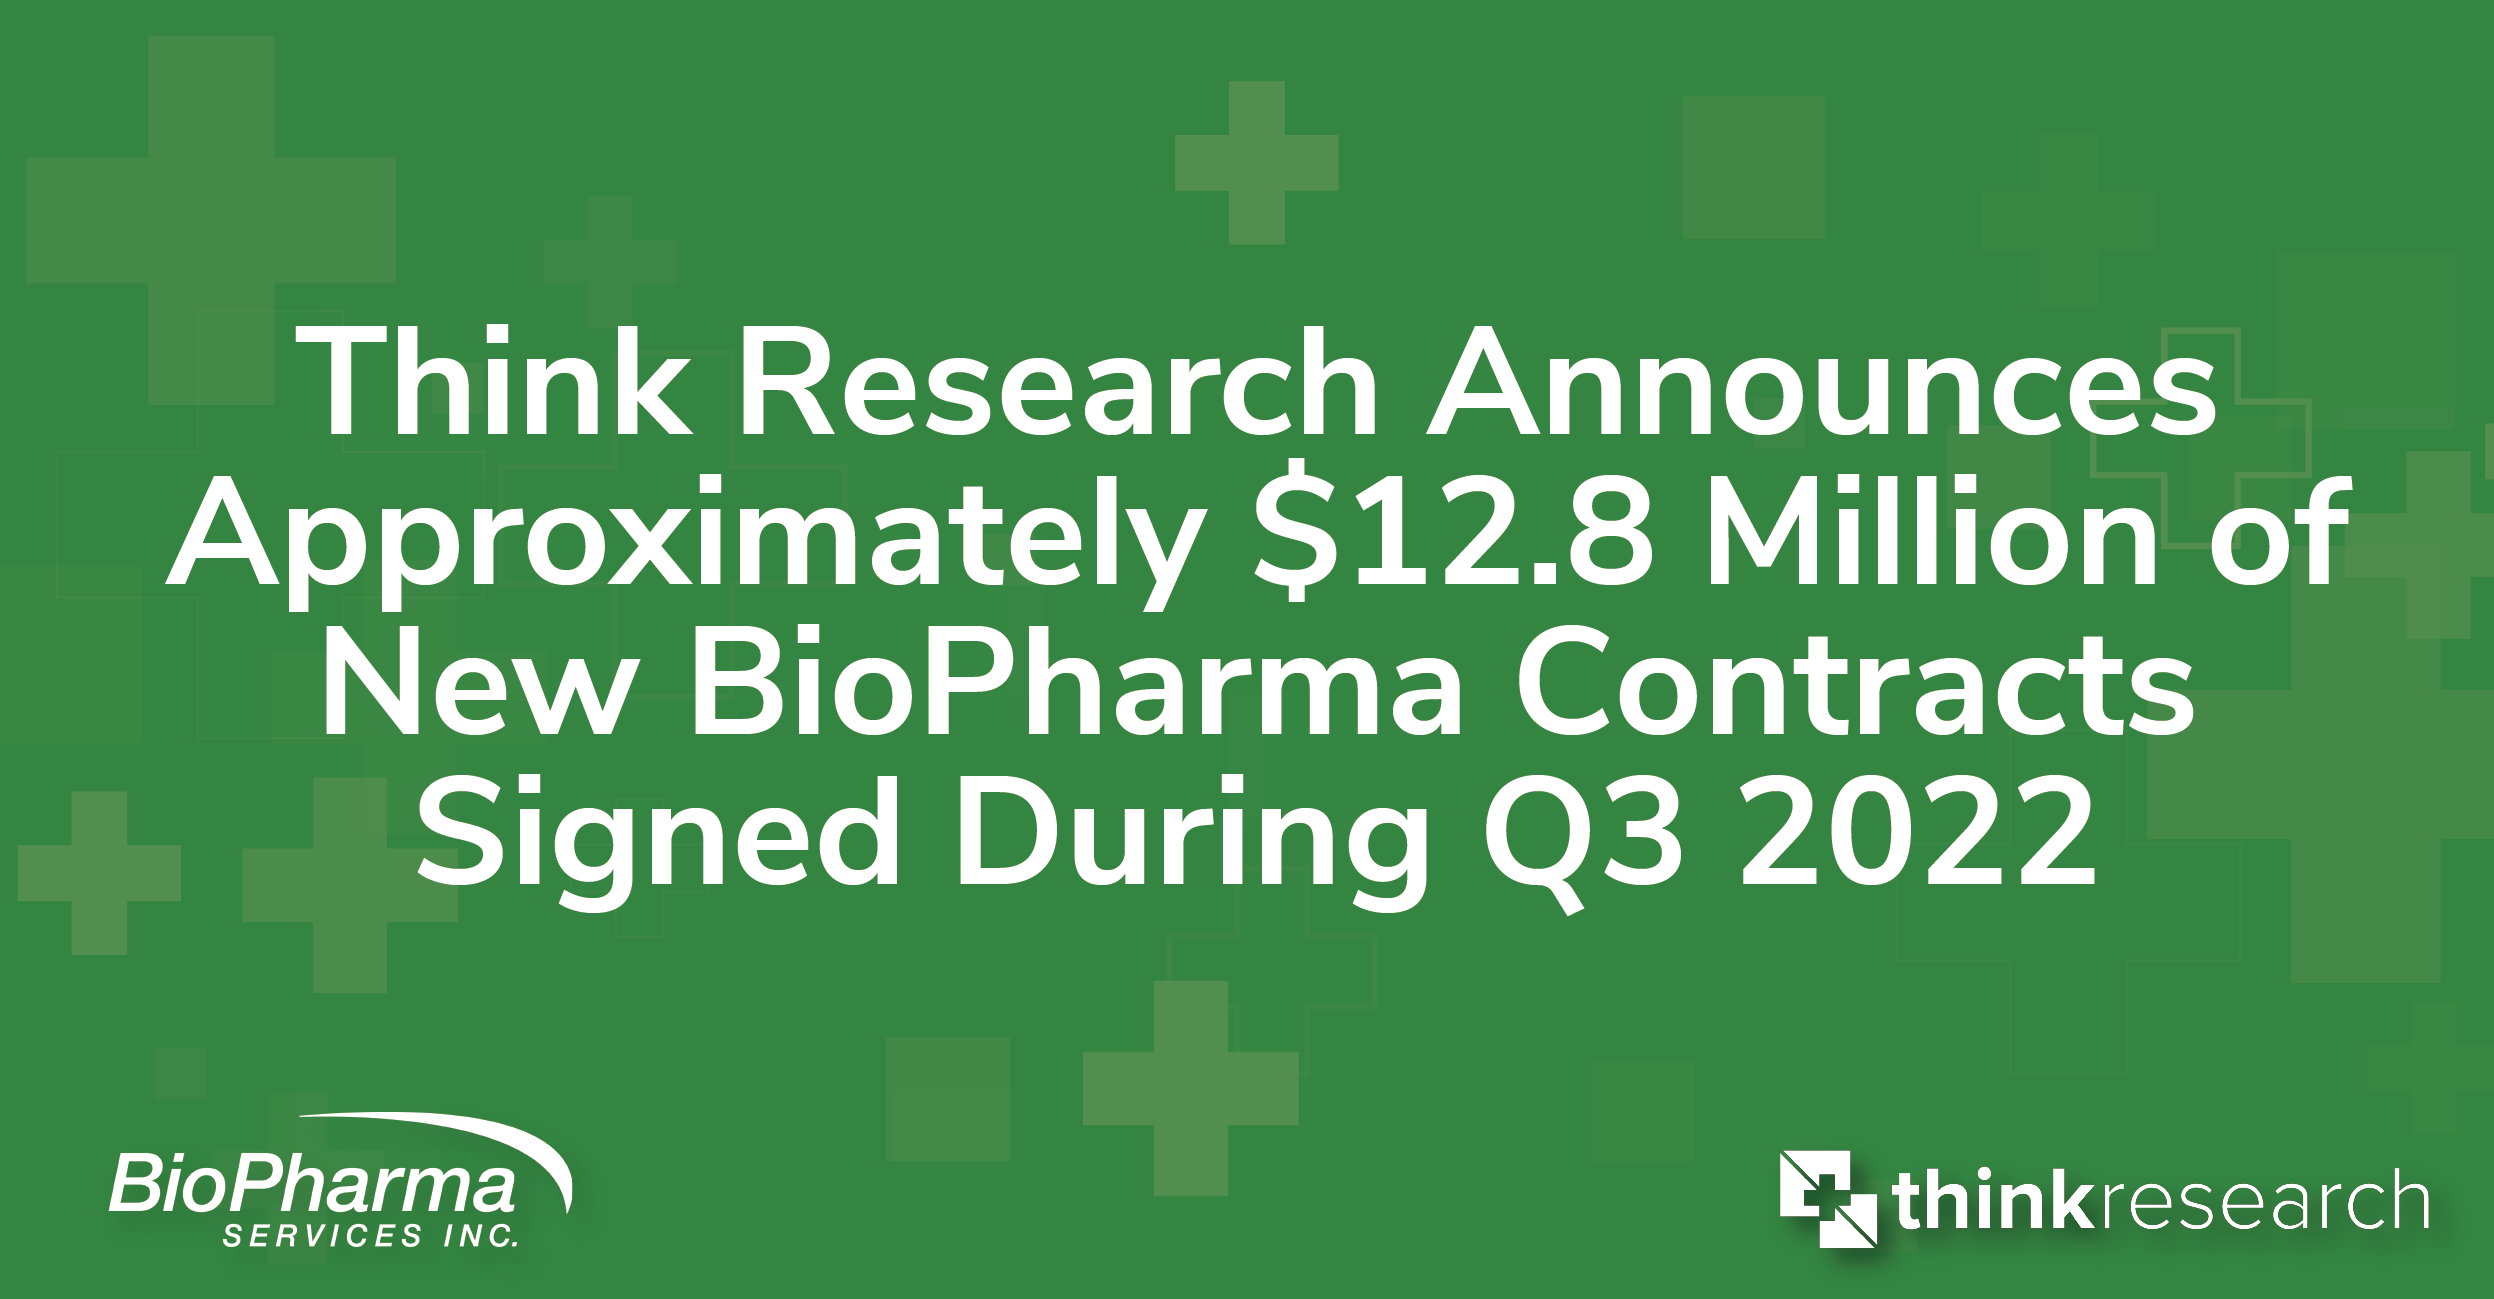 Press Release Image. $12.8 Million of New BioPharma Contracts Signed During Q3 2022.